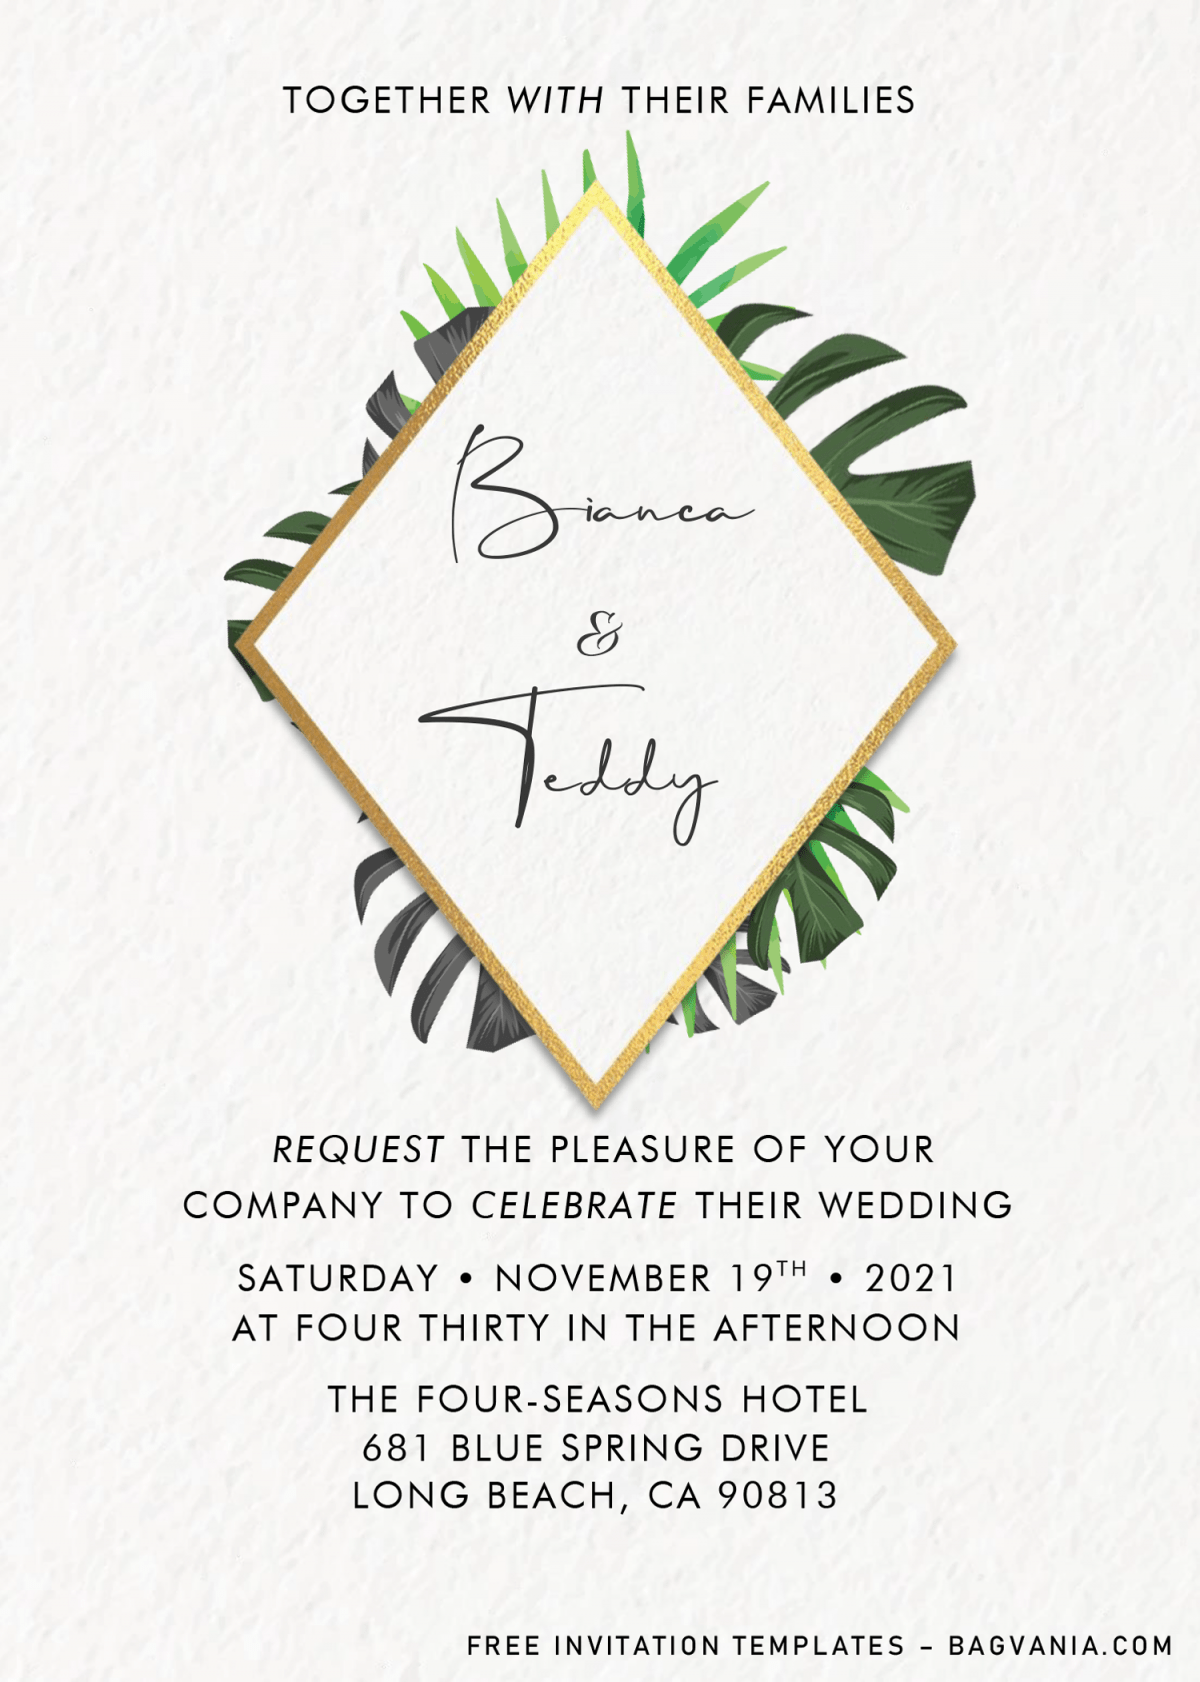 Classy Tropical Invitation Templates - Editable .Docx and has canvas background